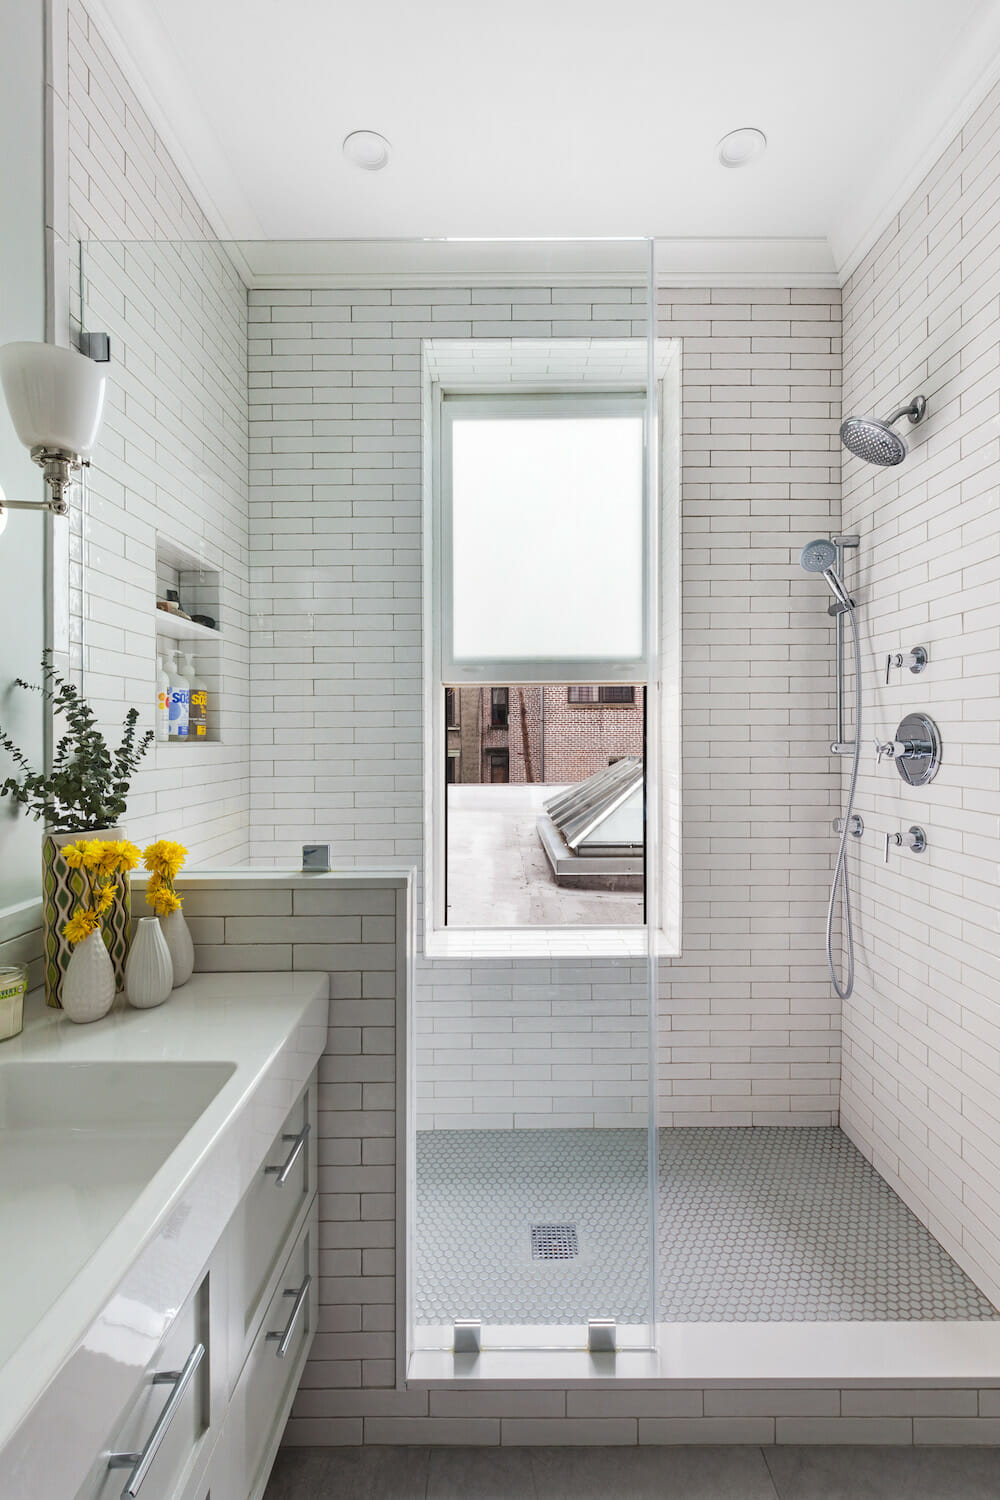 Image of a white bathroom with subway tile and walk-in shower